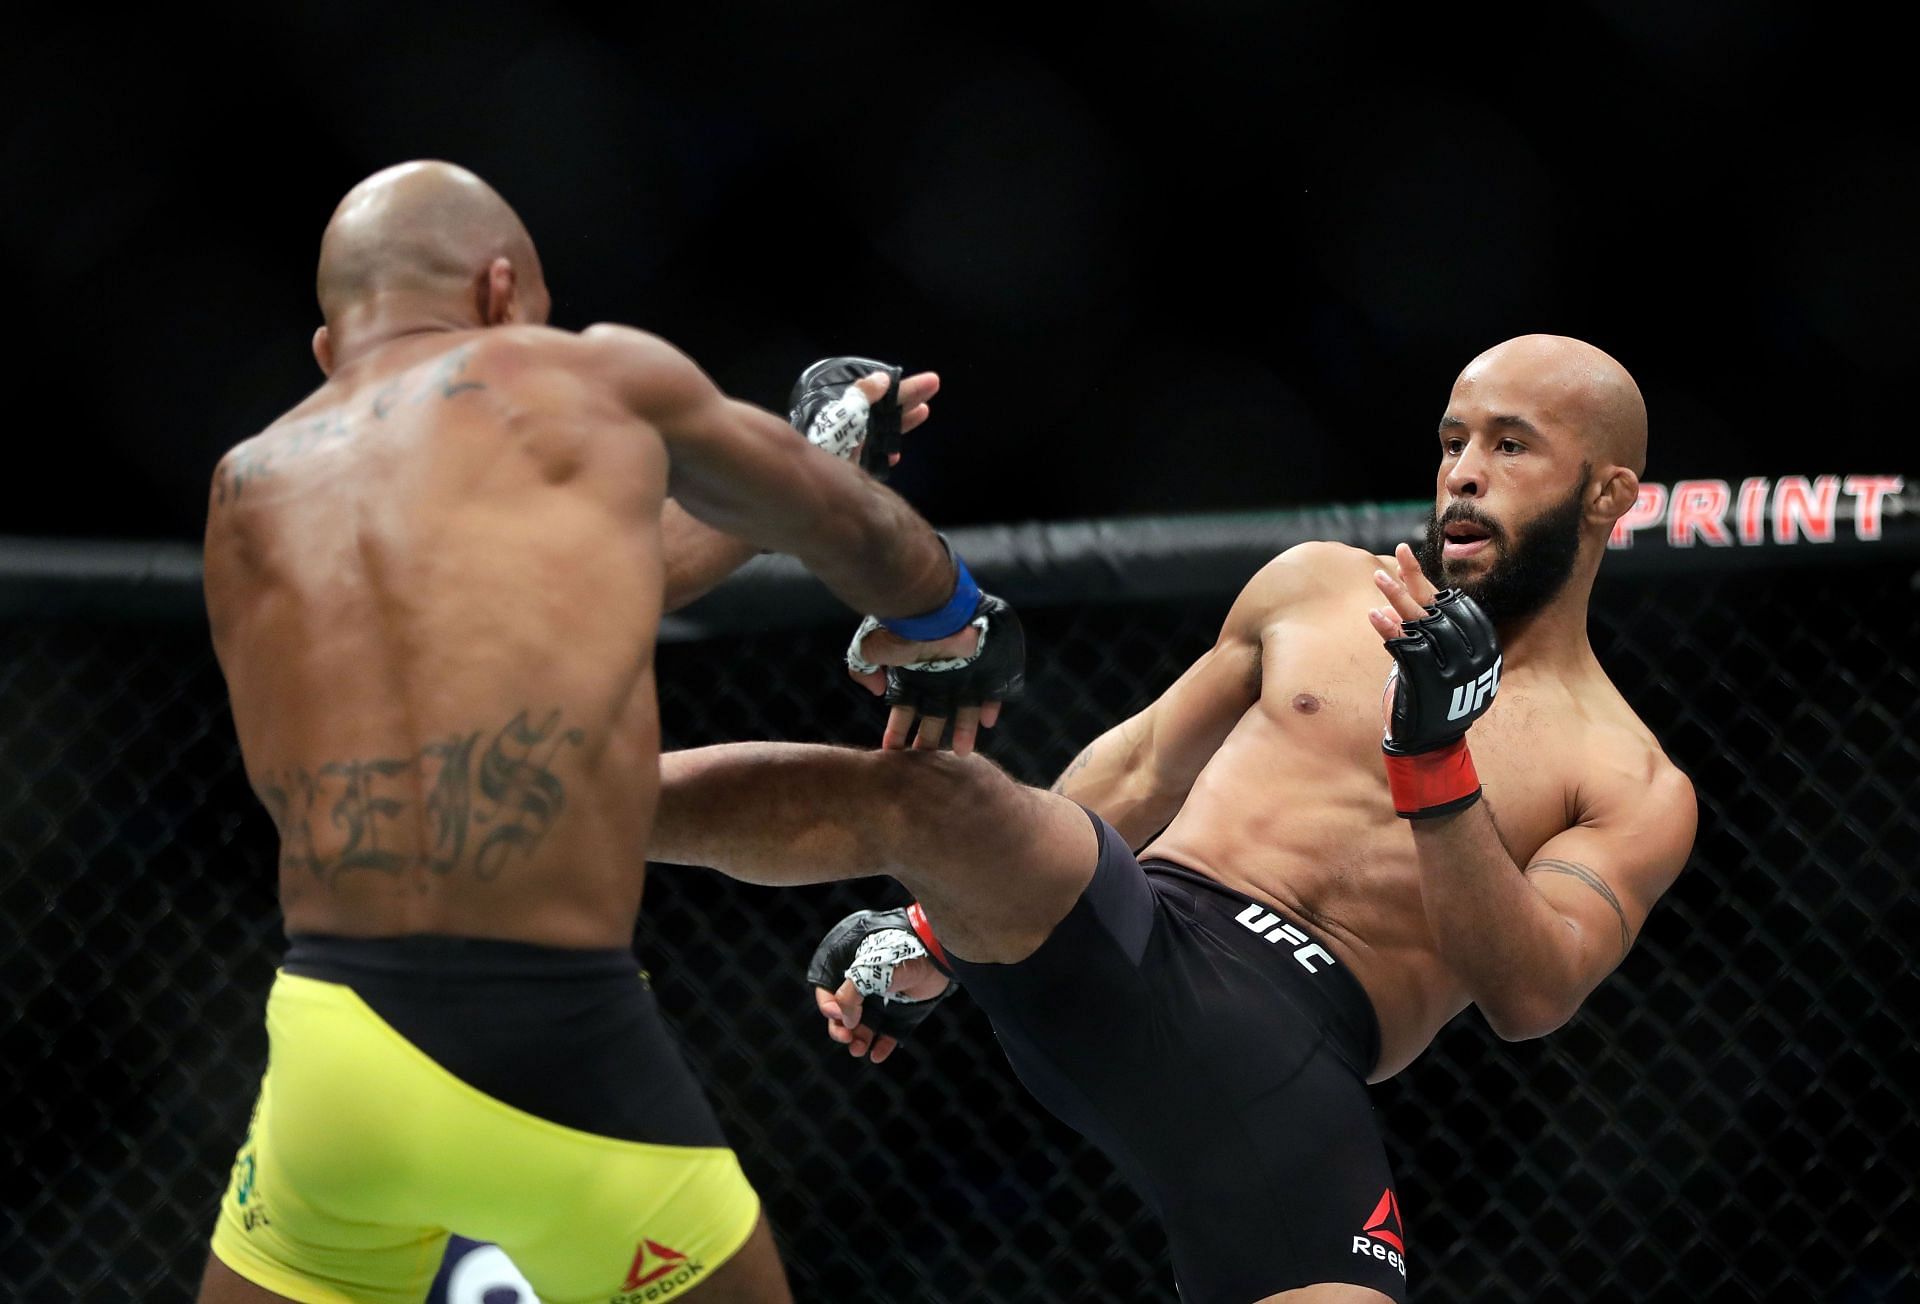 Demetrious Johnson is 12-2 in UFC title fights